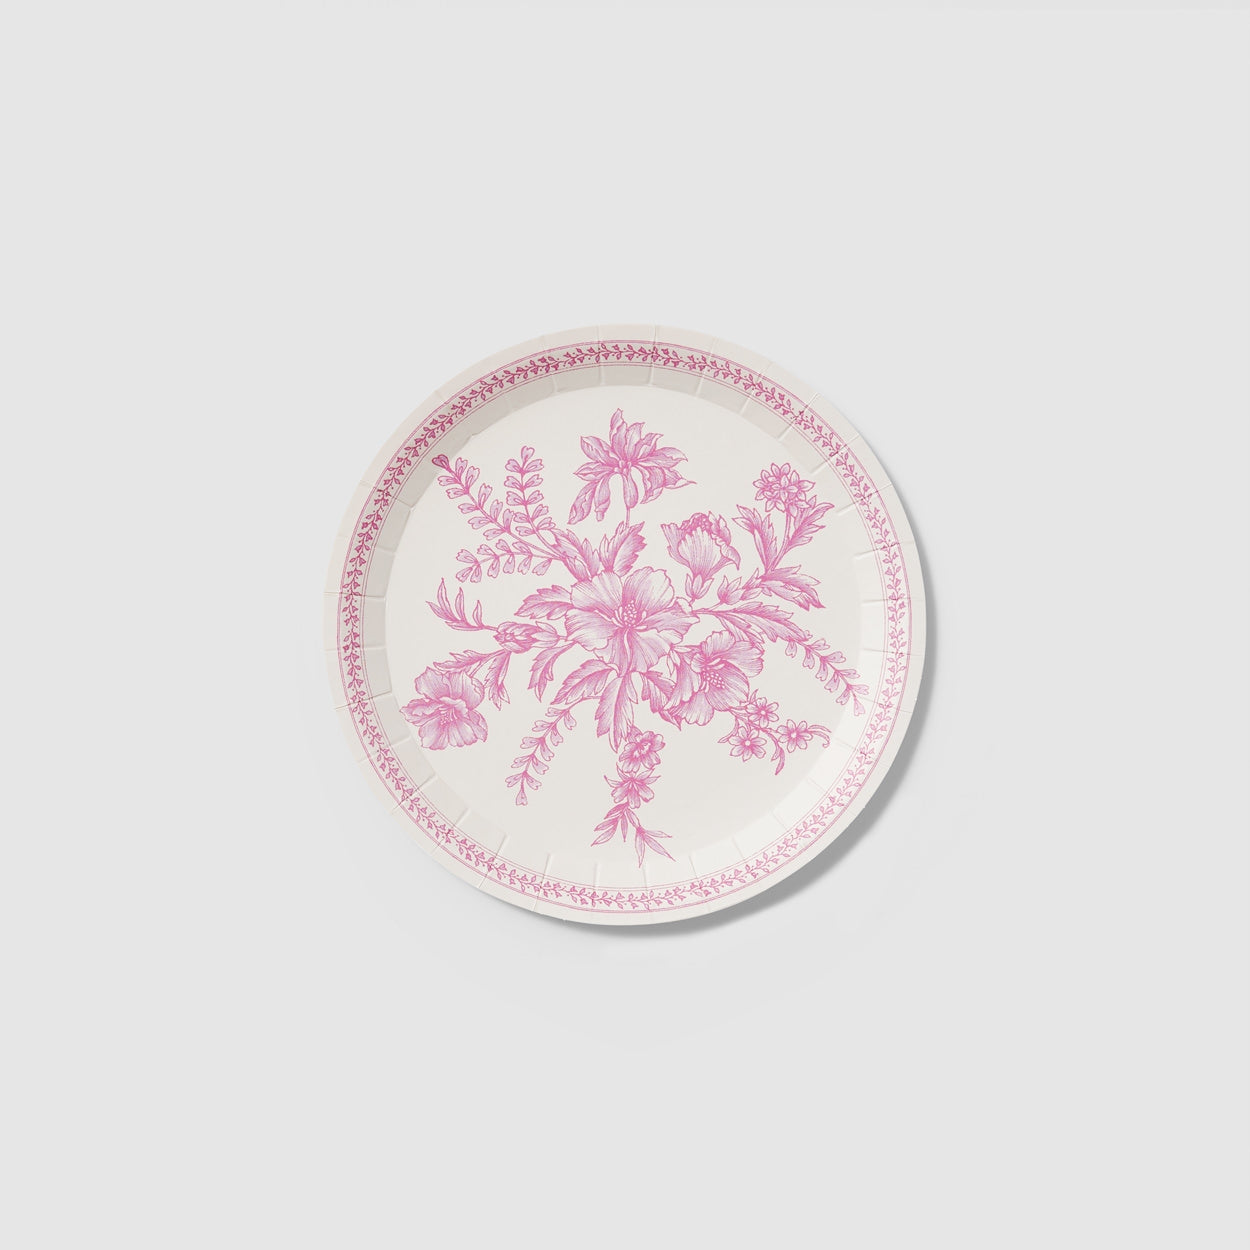 A table set with Pink French Toile Paper Party Dinnerware plates from Coterie Party Supplies featuring floral toile dinnerware patterns that evoke the charm of the French countryside, complemented by silverware.